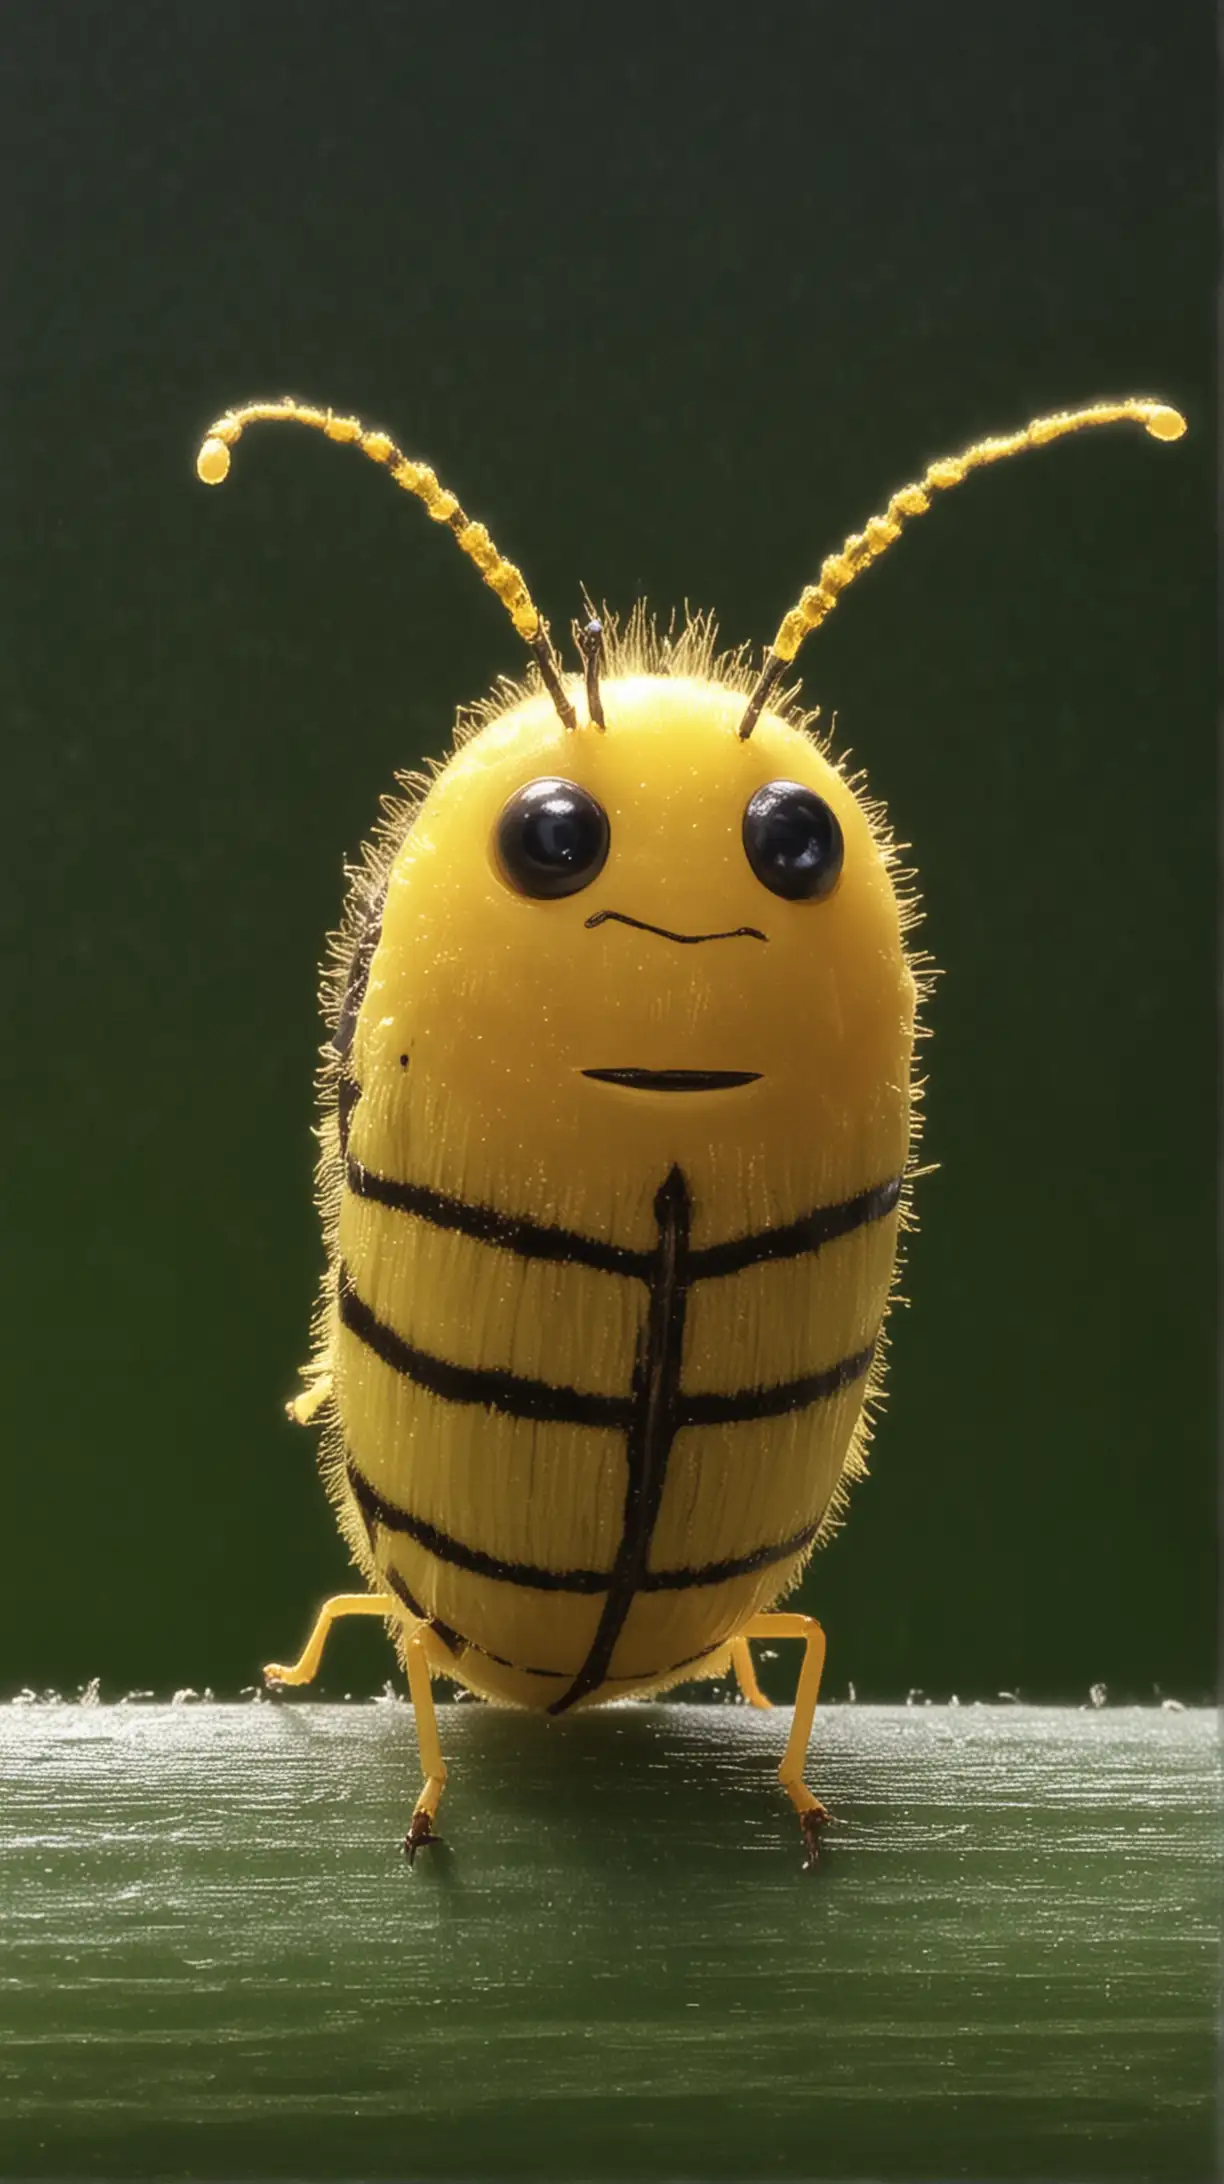 Adorable Talking Lightning Bug in the Meadow